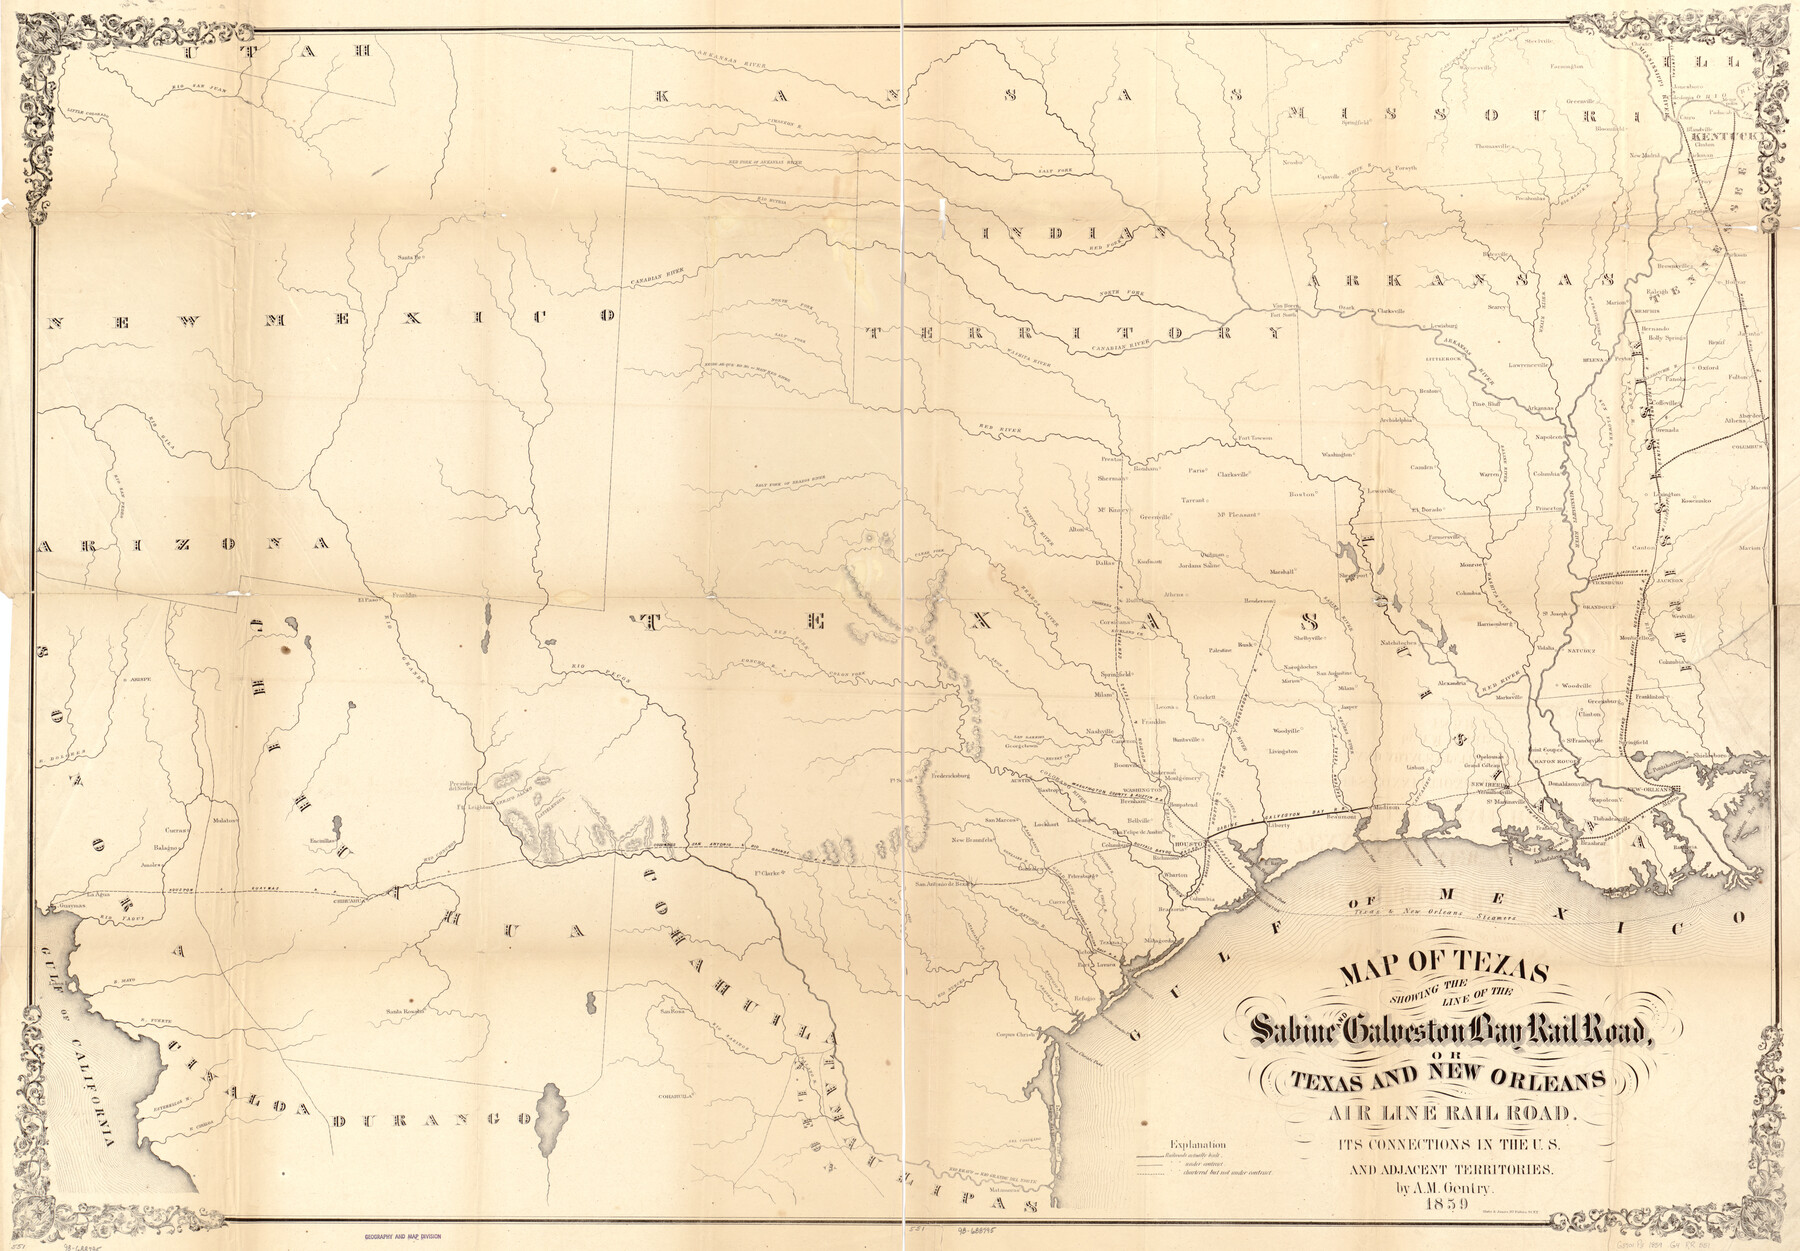 93610, Map of Texas showing the Sabine and Galveston Bay Rail Road, or Texas and New Orleans Air Line Rail Line, its connections in the U.S. and adjacent territories., Library of Congress